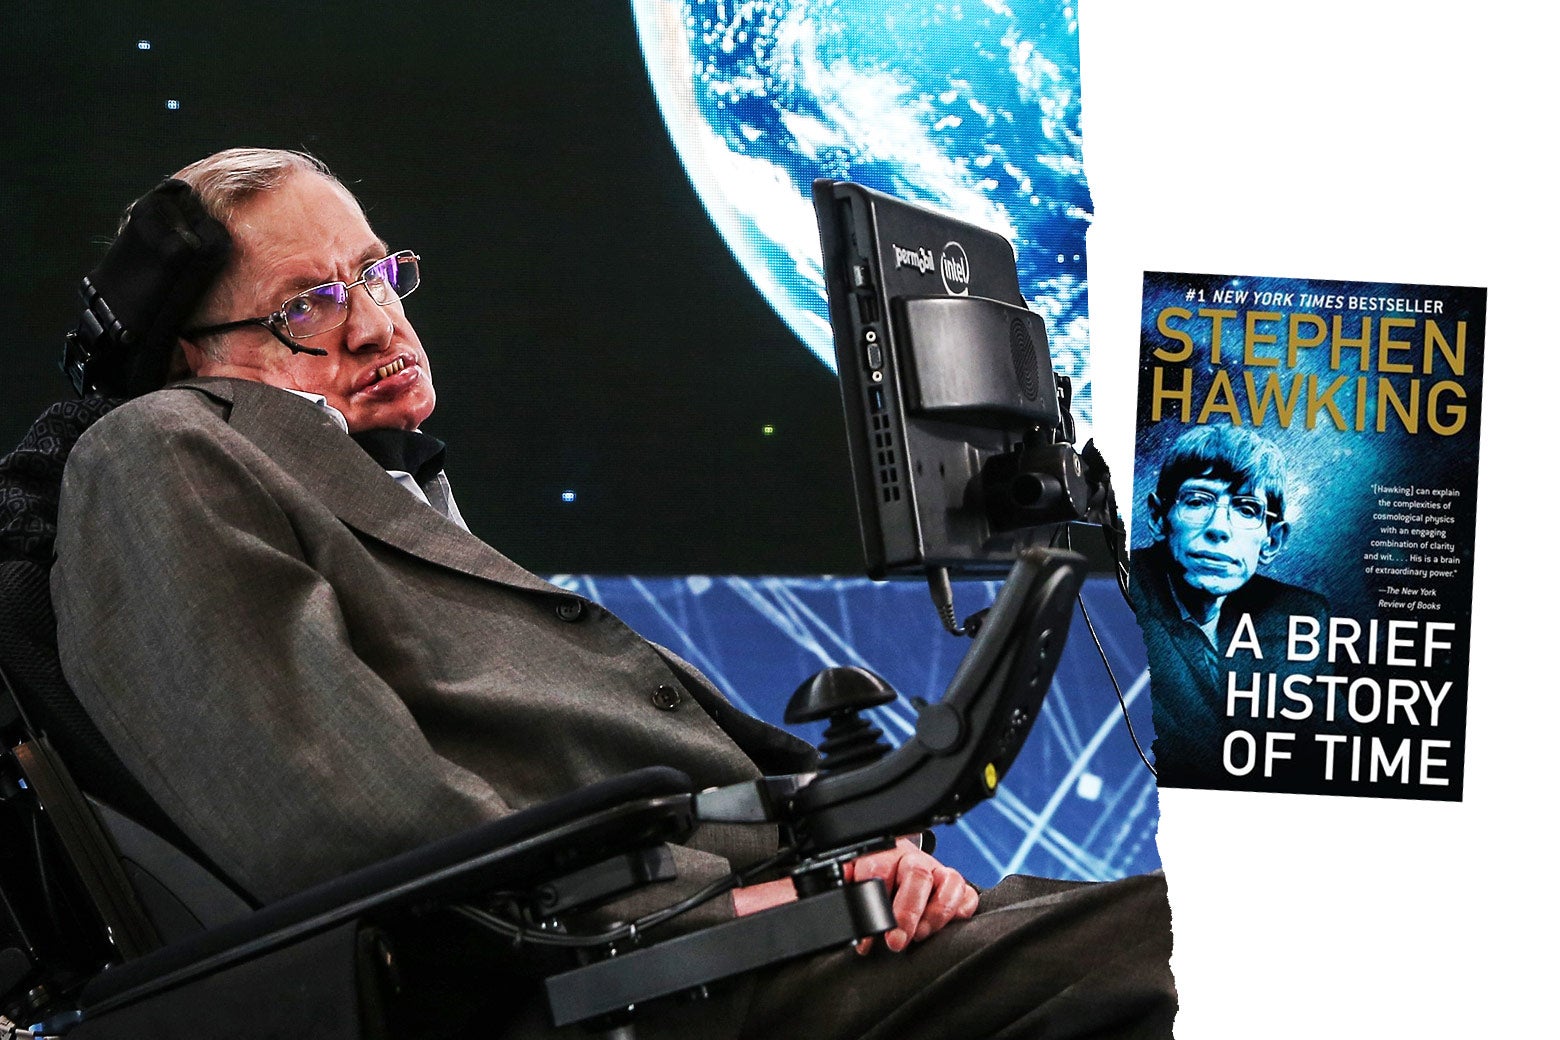 Stephen Hawking and his book A Brief History of Time.